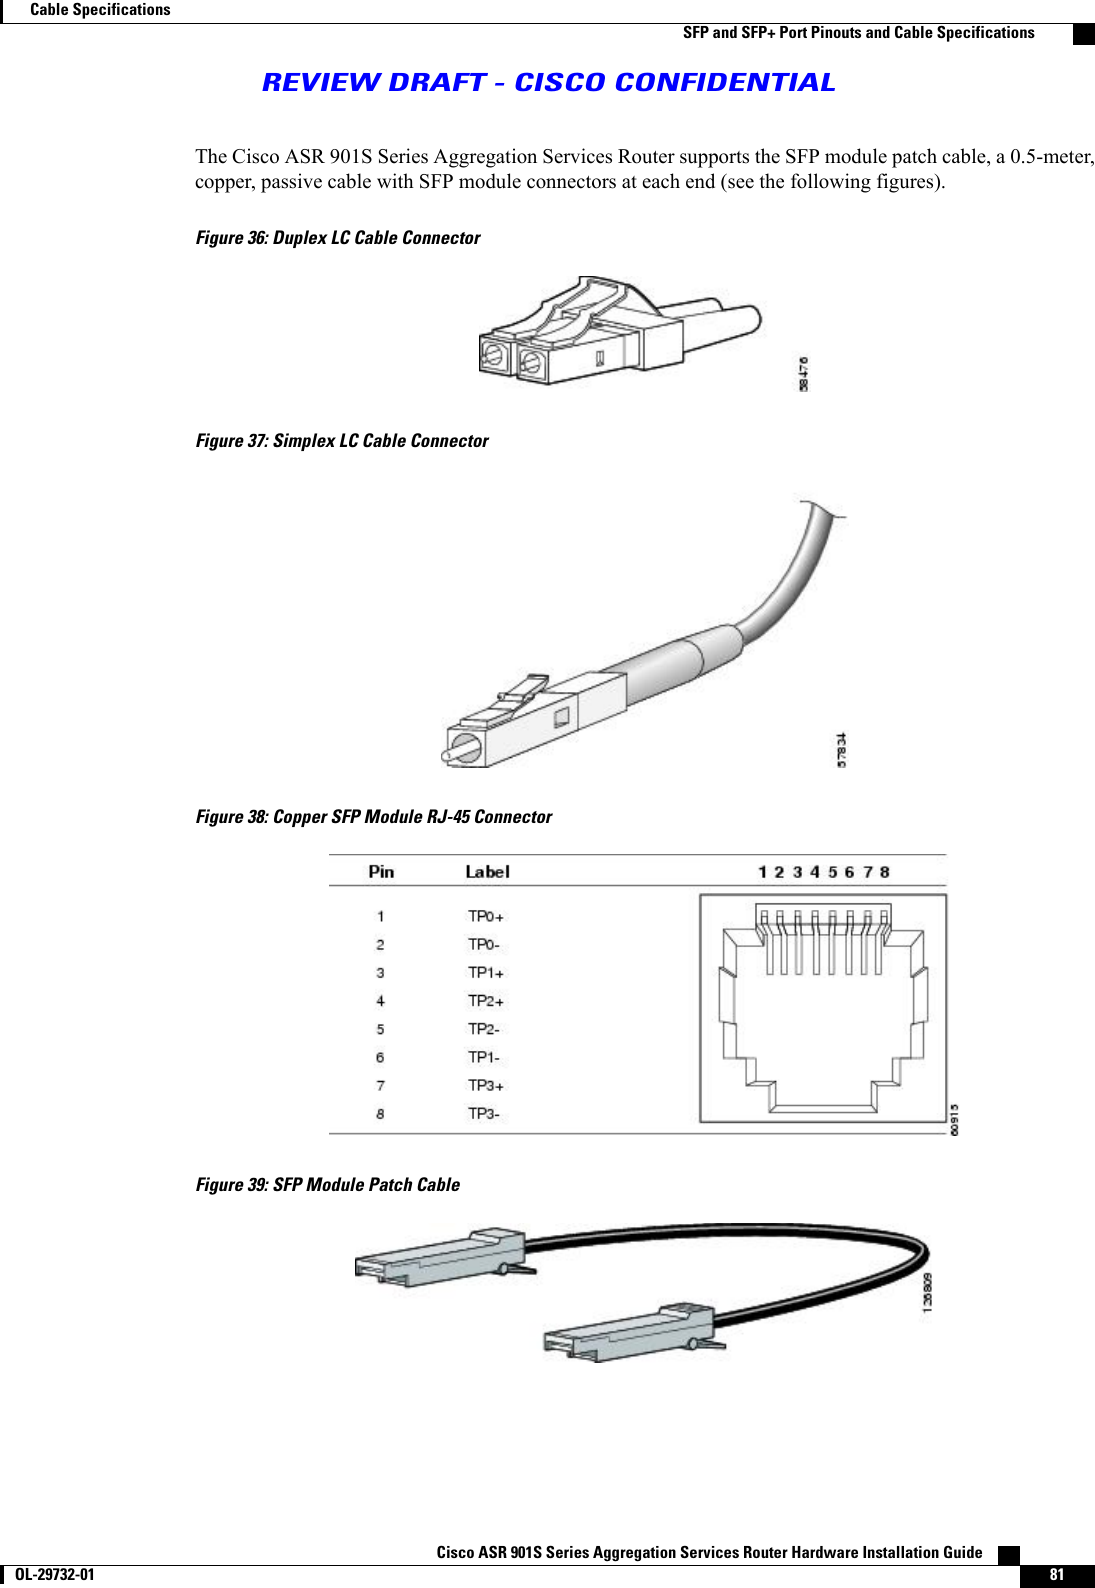 The Cisco ASR 901S Series Aggregation Services Router supports the SFP module patch cable, a 0.5-meter,copper, passive cable with SFP module connectors at each end (see the following figures).Figure 36: Duplex LC Cable ConnectorFigure 37: Simplex LC Cable ConnectorFigure 38: Copper SFP Module RJ-45 ConnectorFigure 39: SFP Module Patch CableCisco ASR 901S Series Aggregation Services Router Hardware Installation Guide       OL-29732-01 81Cable SpecificationsSFP and SFP+ Port Pinouts and Cable SpecificationsREVIEW DRAFT - CISCO CONFIDENTIAL